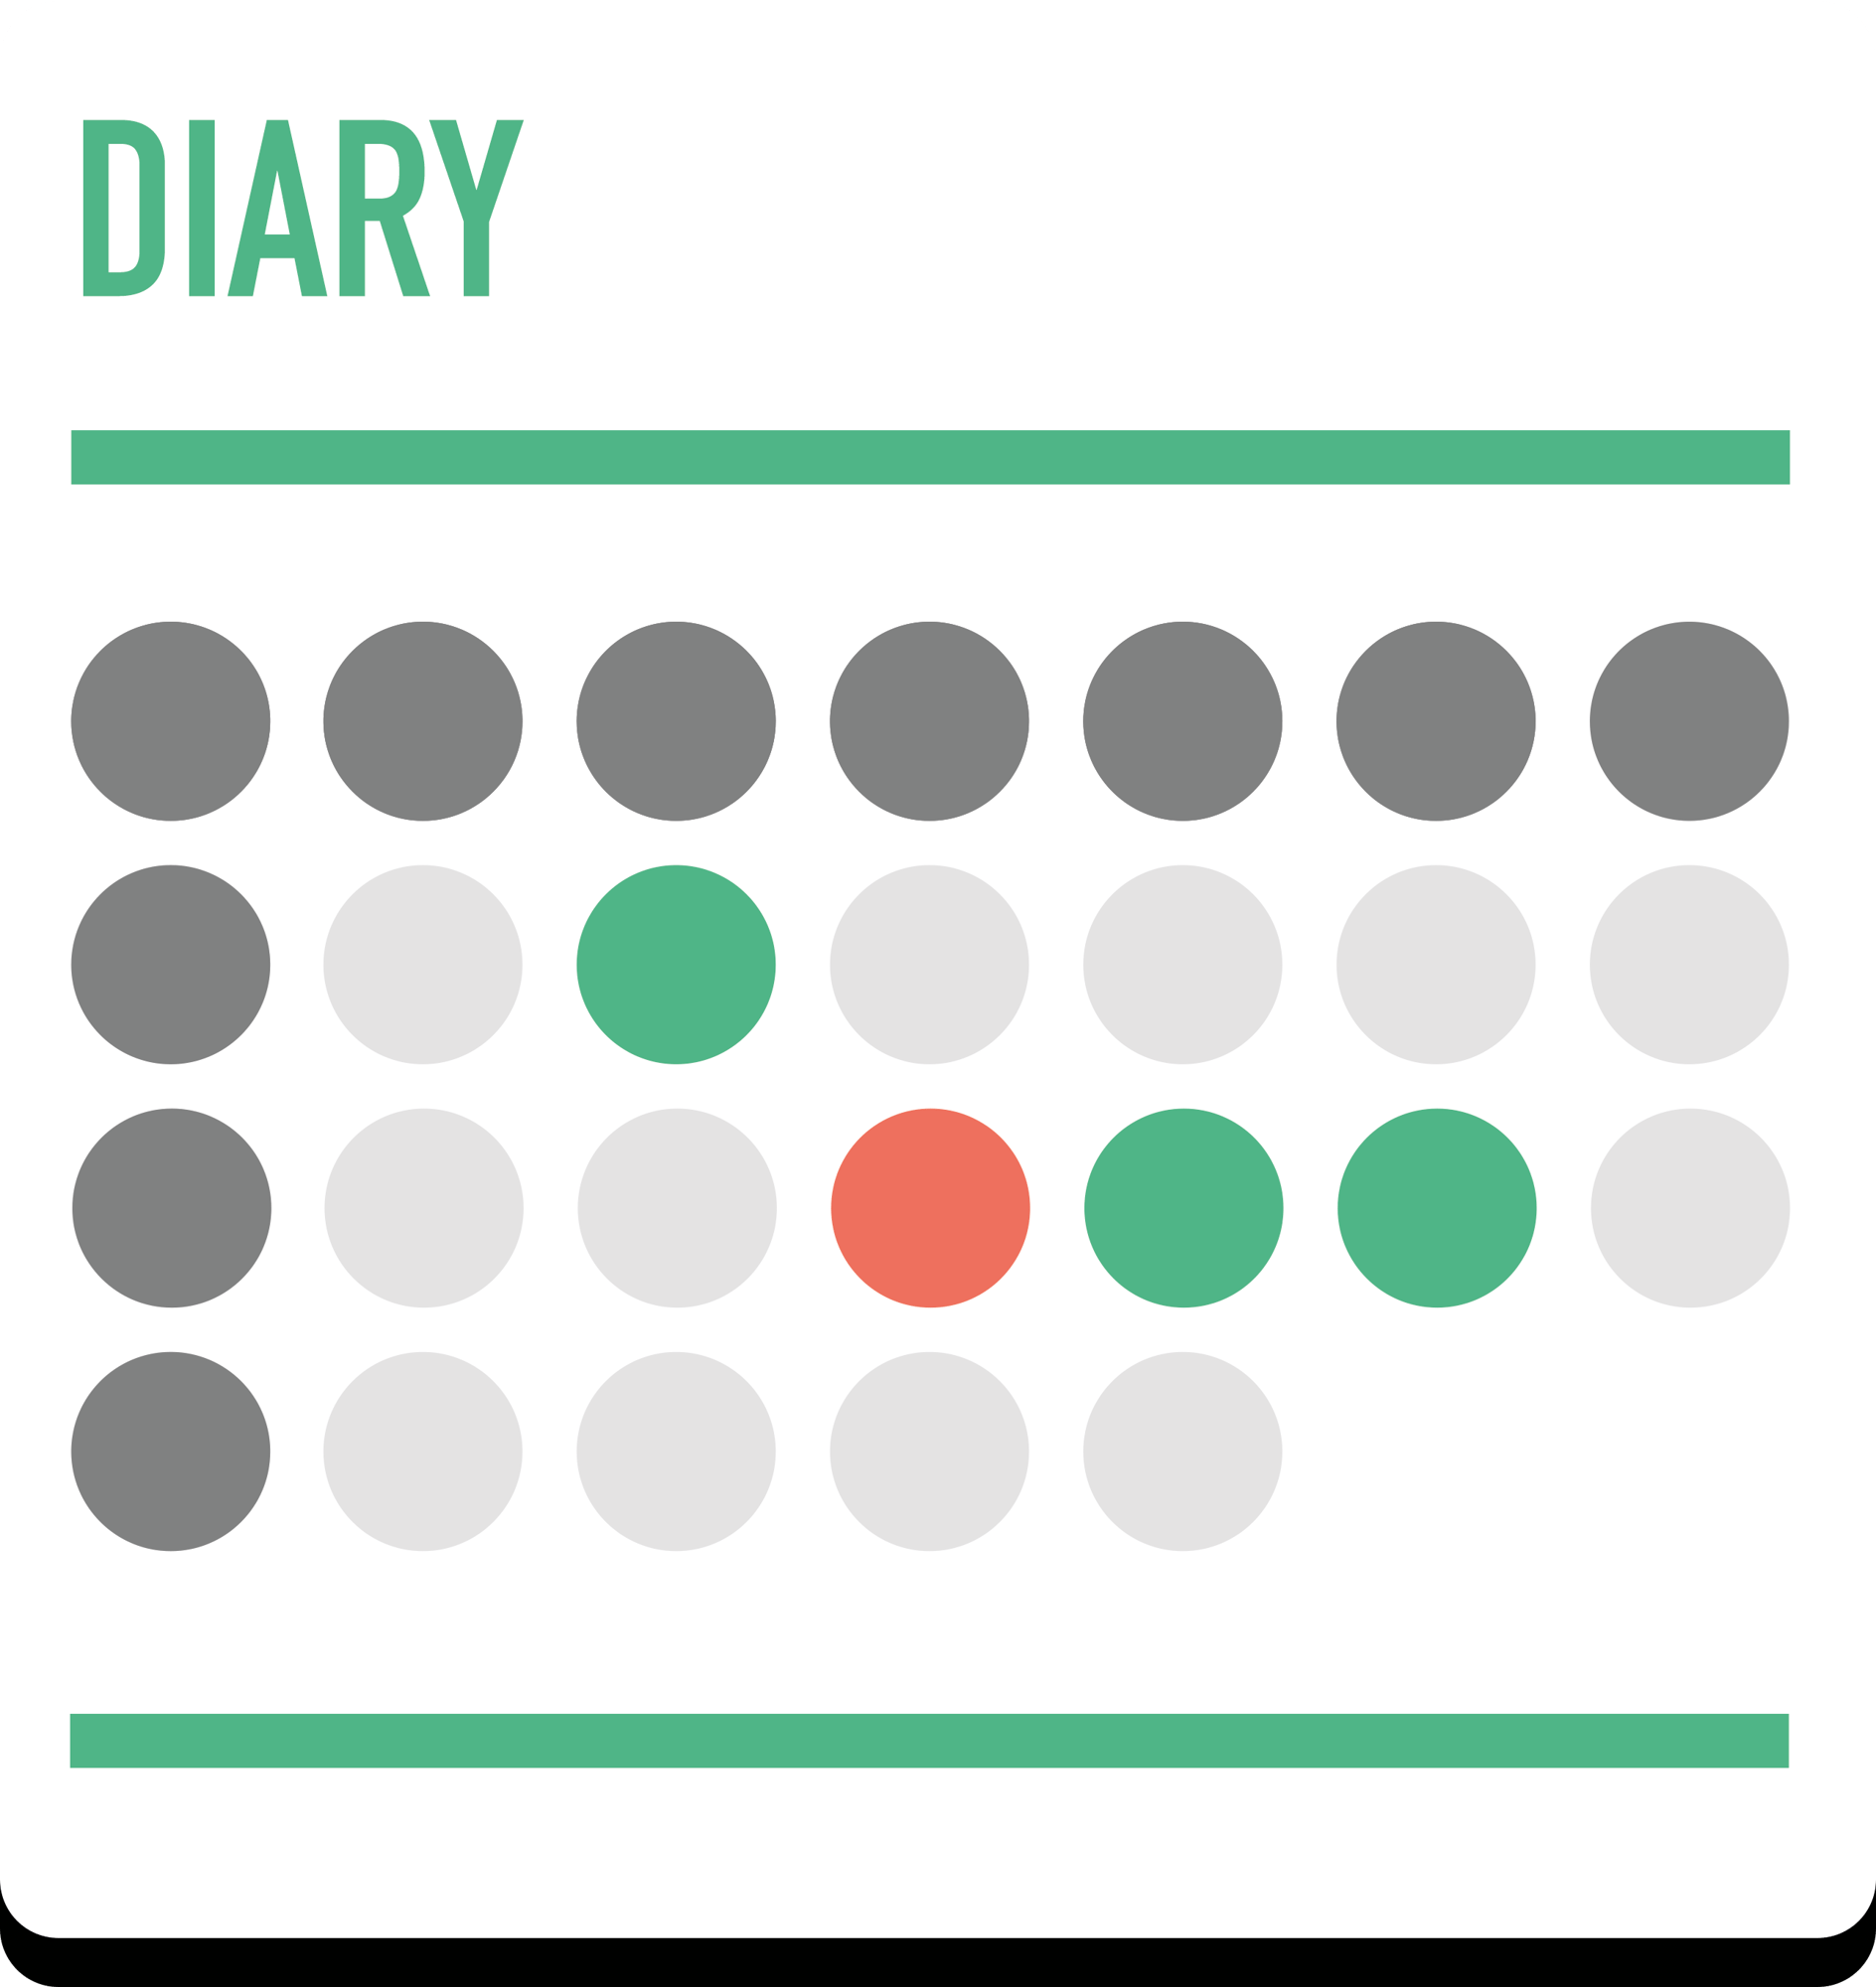 Diary and Scheduling app for cleaners